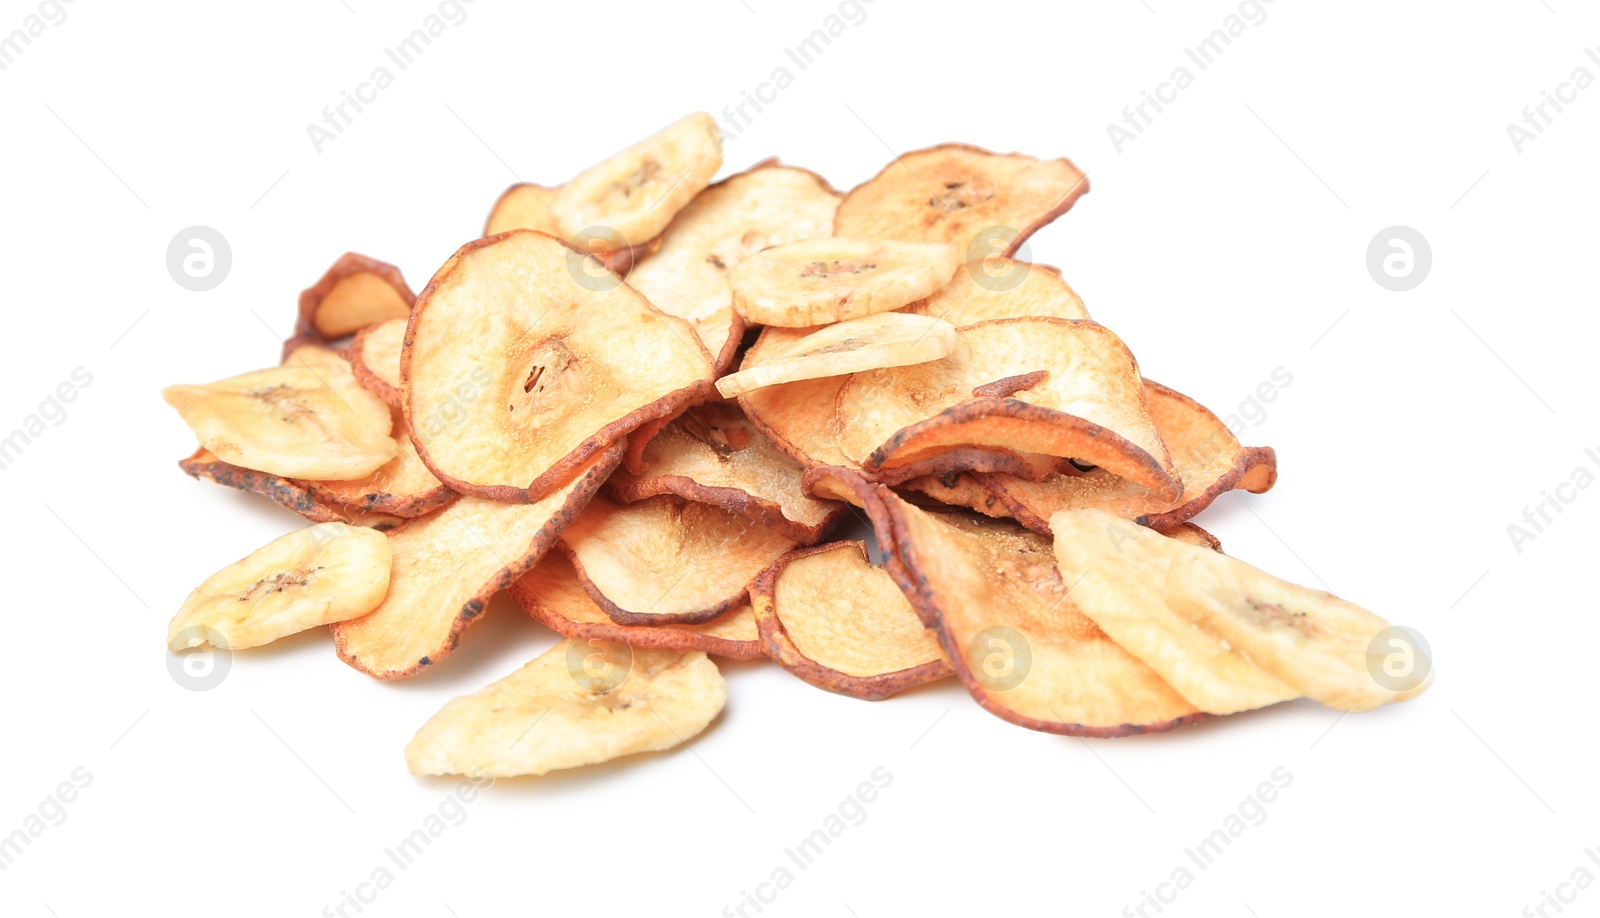 Photo of Tasty dried apples and banana on white background